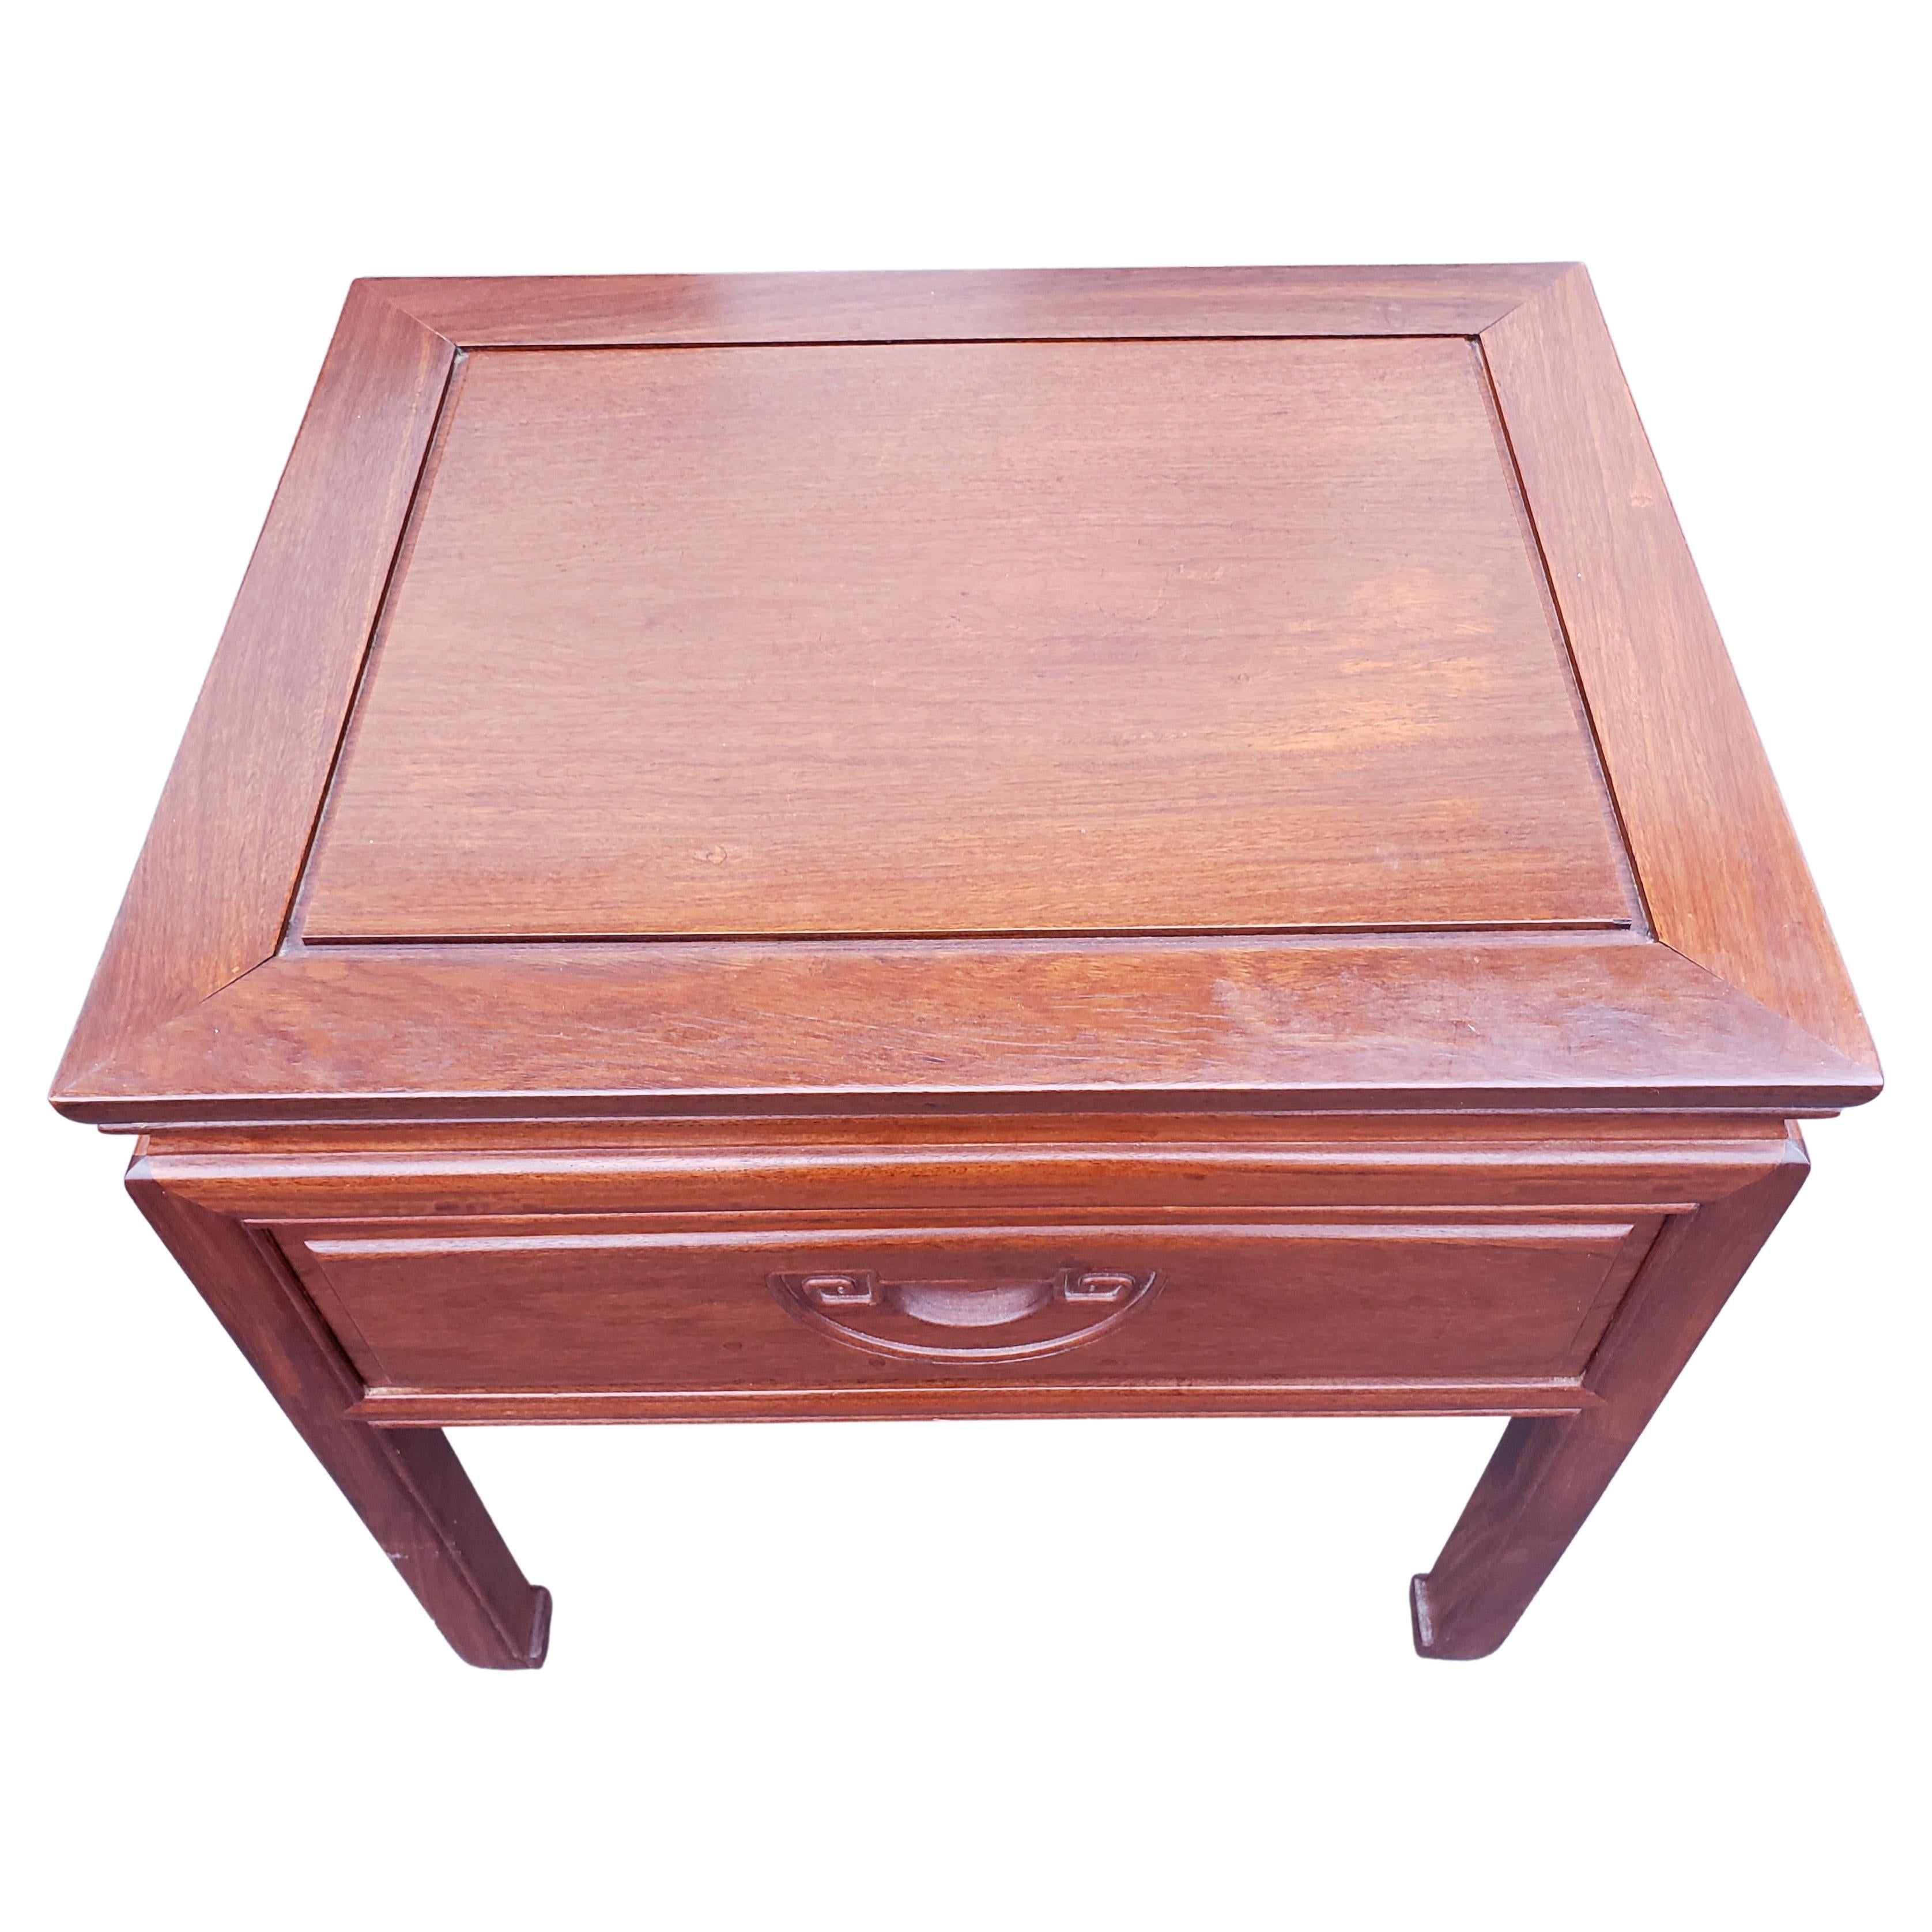 Pair of rosewood hand crafted side tables with integrated carved handles. Very good condition. Devetailed drawer. Finished on all sides, inside out. Matching chest of drawers in our inventory.
Measurements: 24